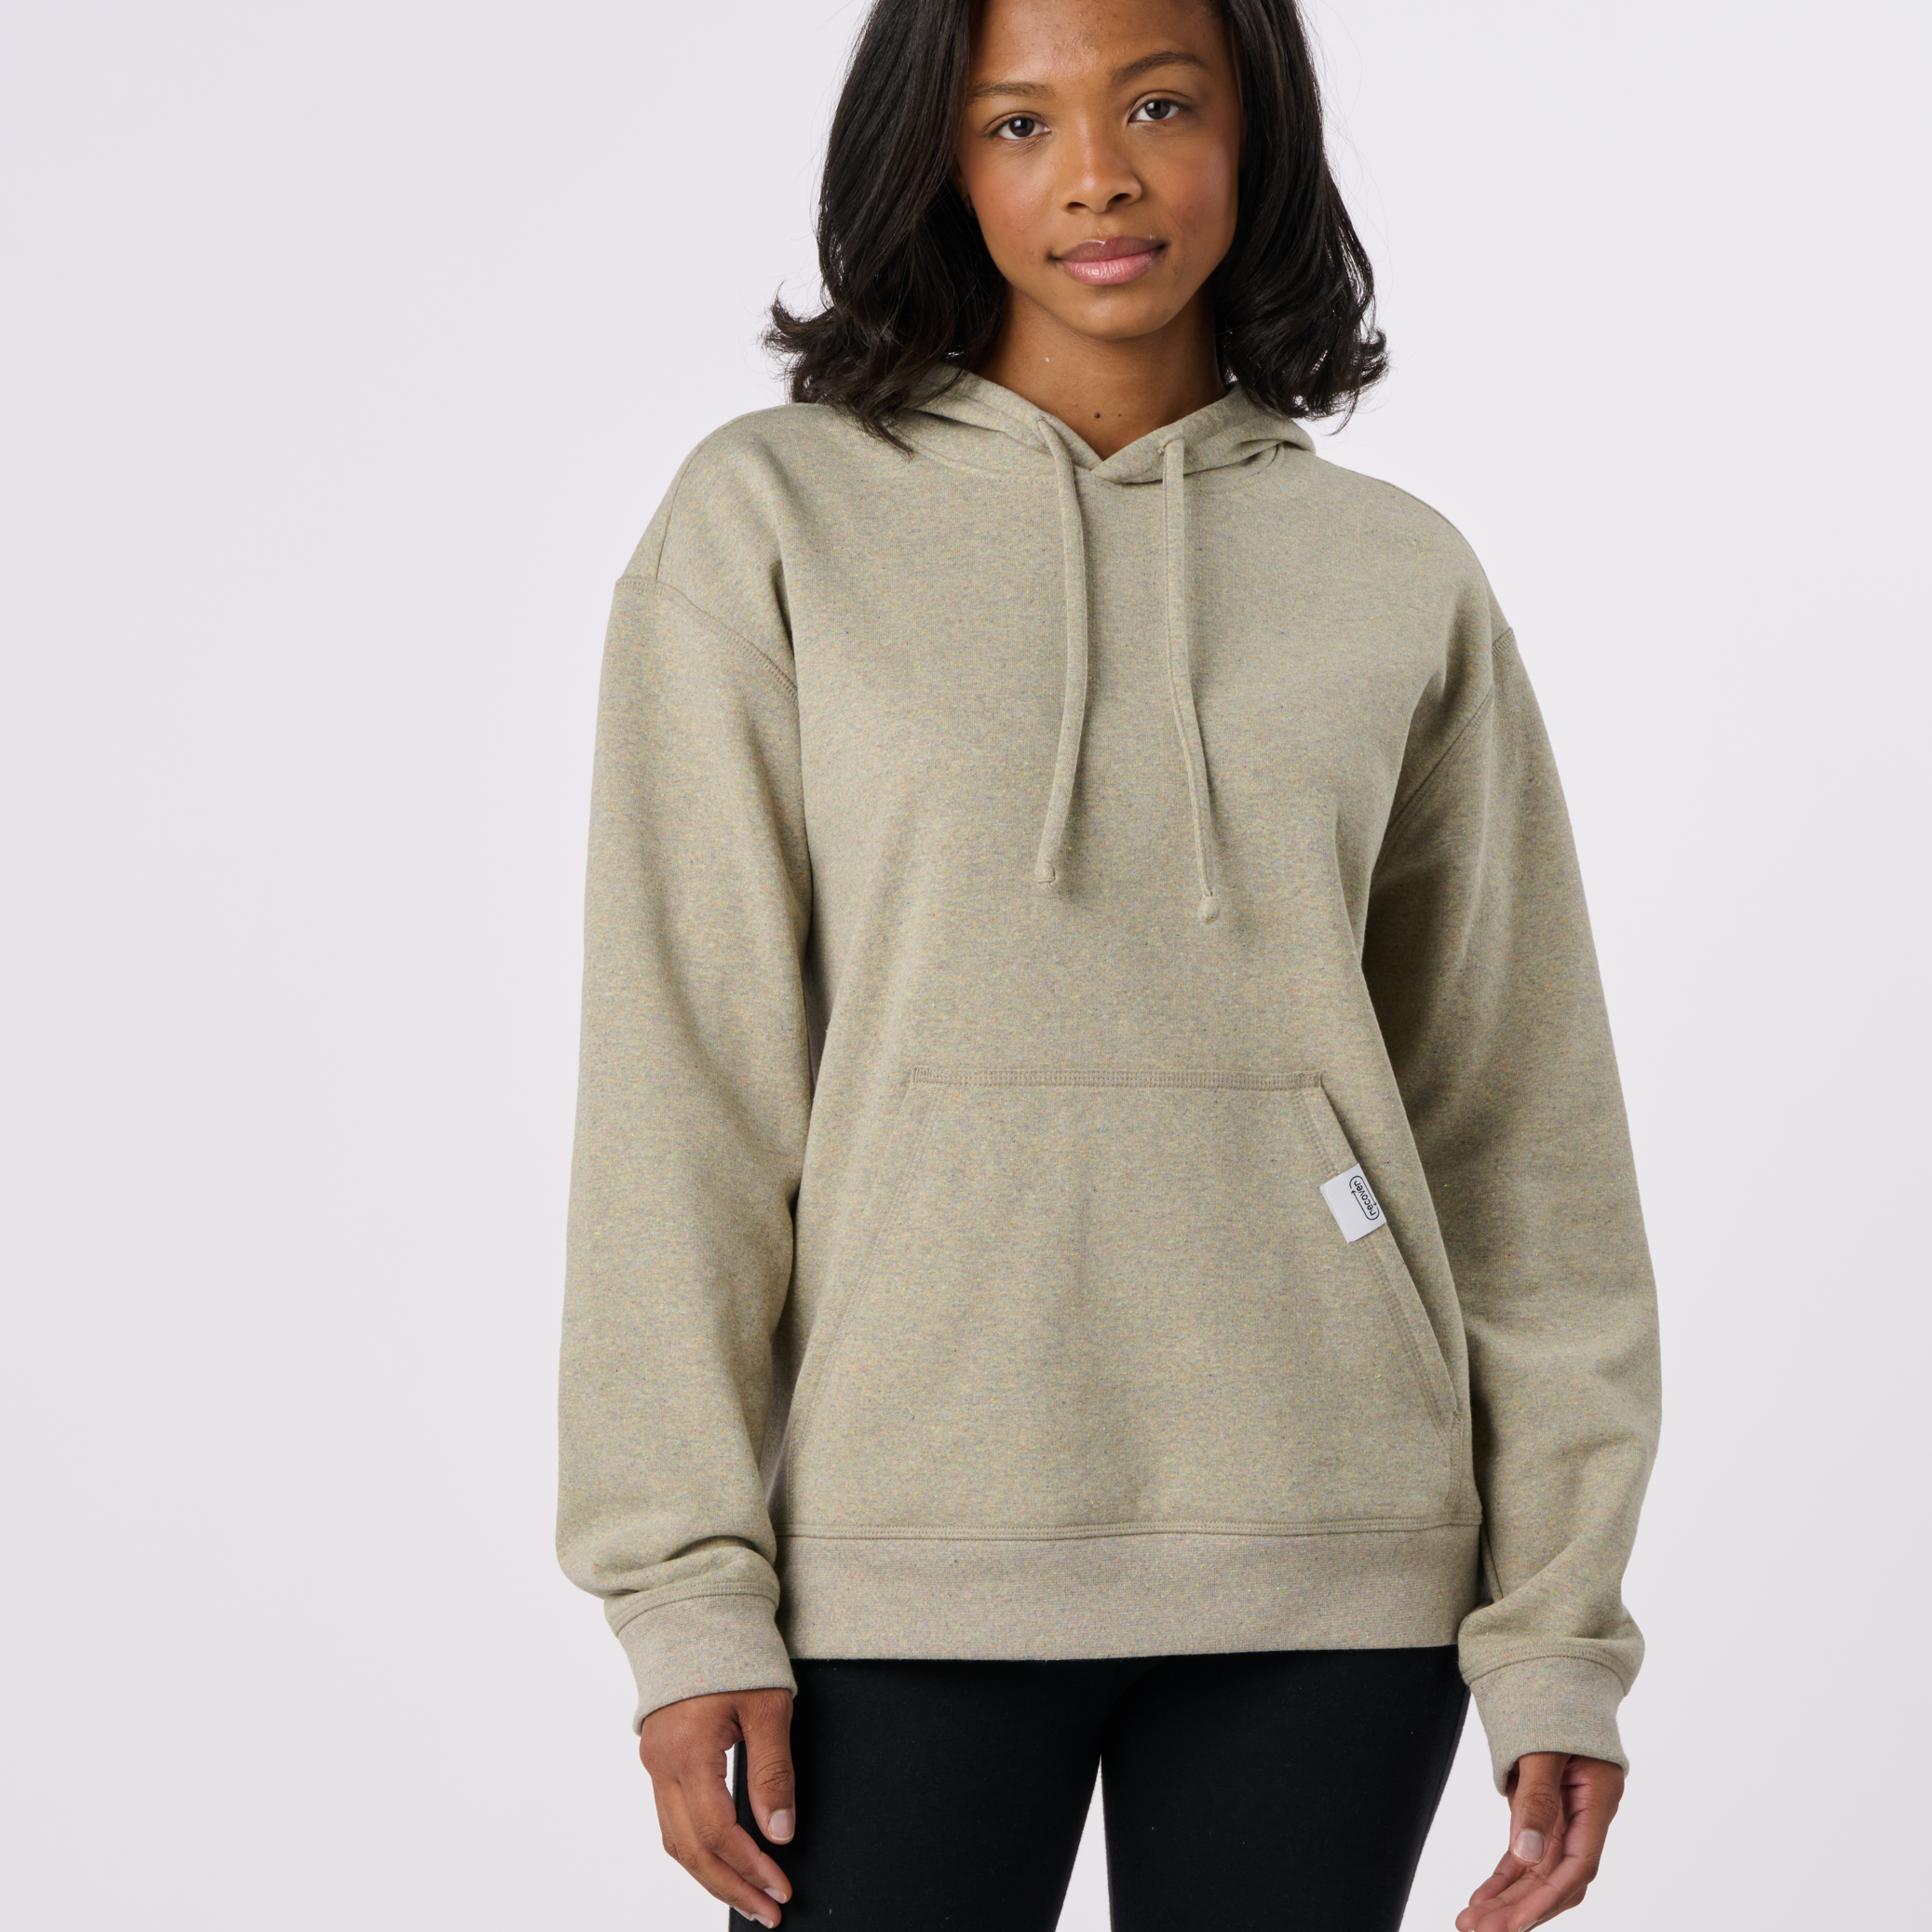 RECOVER_RC1093_UNISEXPULLOVERHOODIE_RAINBOW_FRONT_W_0e654856-f570-43bf-888b-906ea4501e30.png